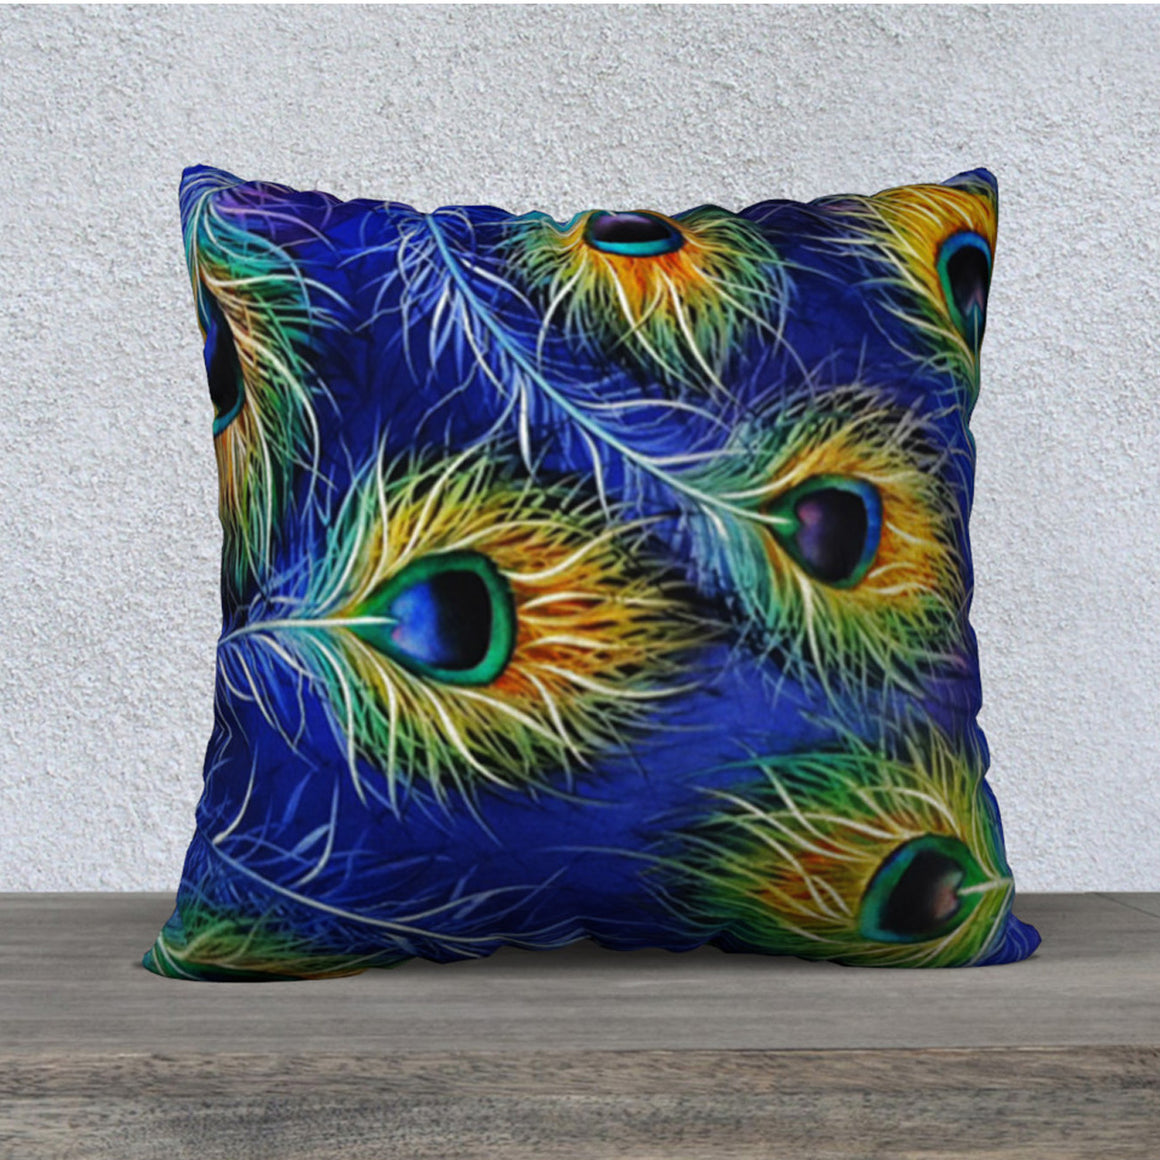 Peacock Multi-Feathered Pillow